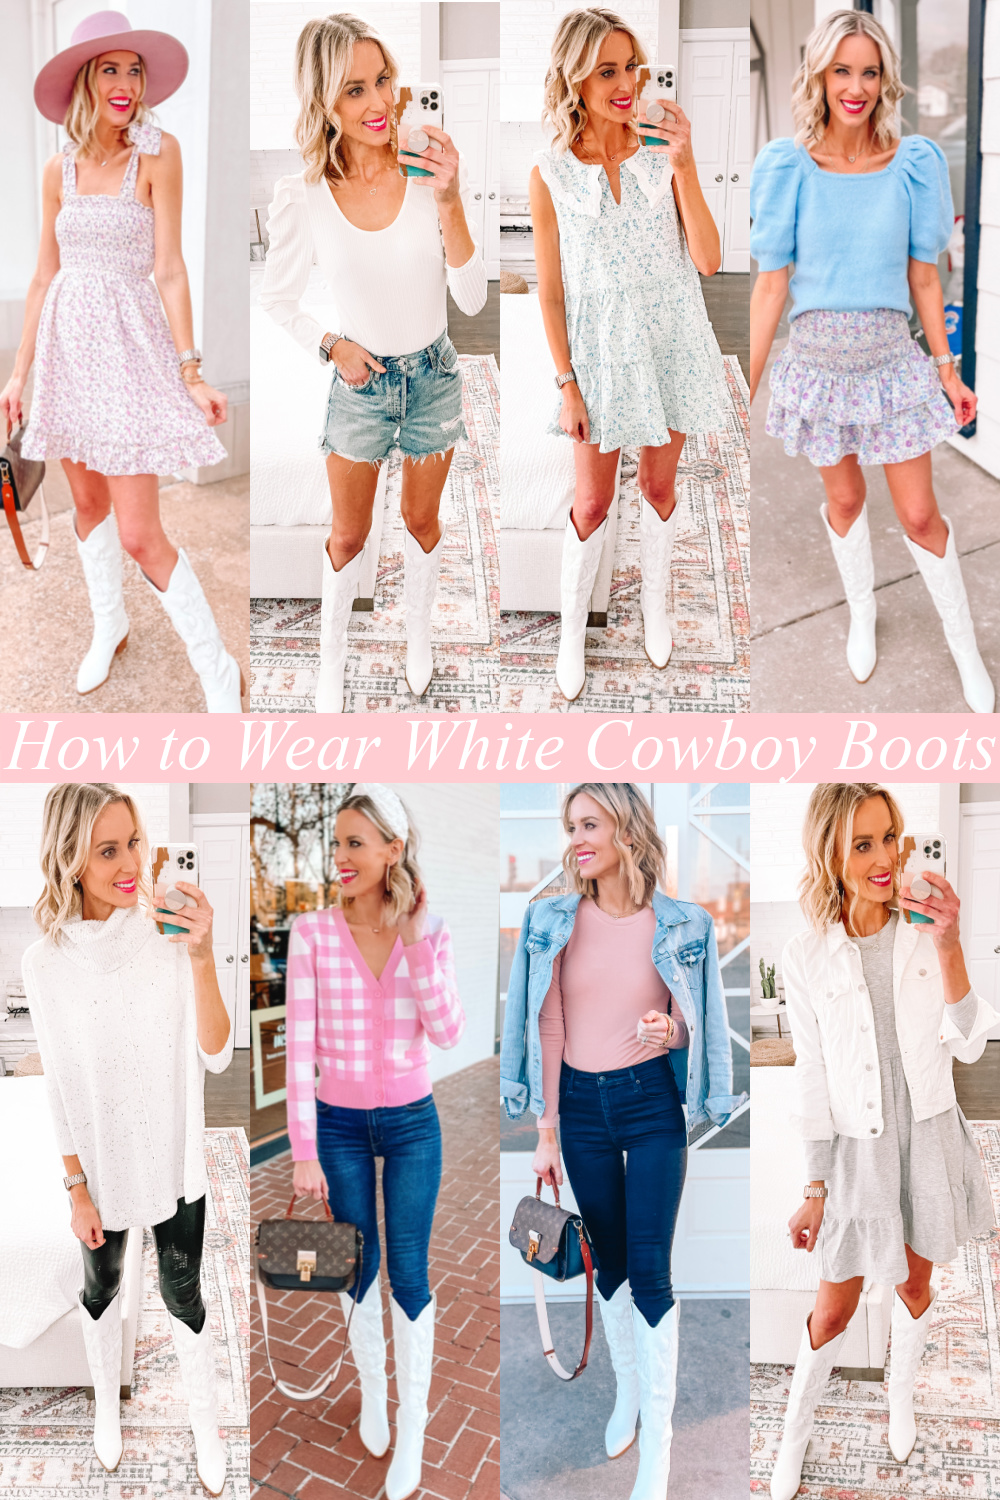 Ways to Wear Cowboy Boots - Stages West